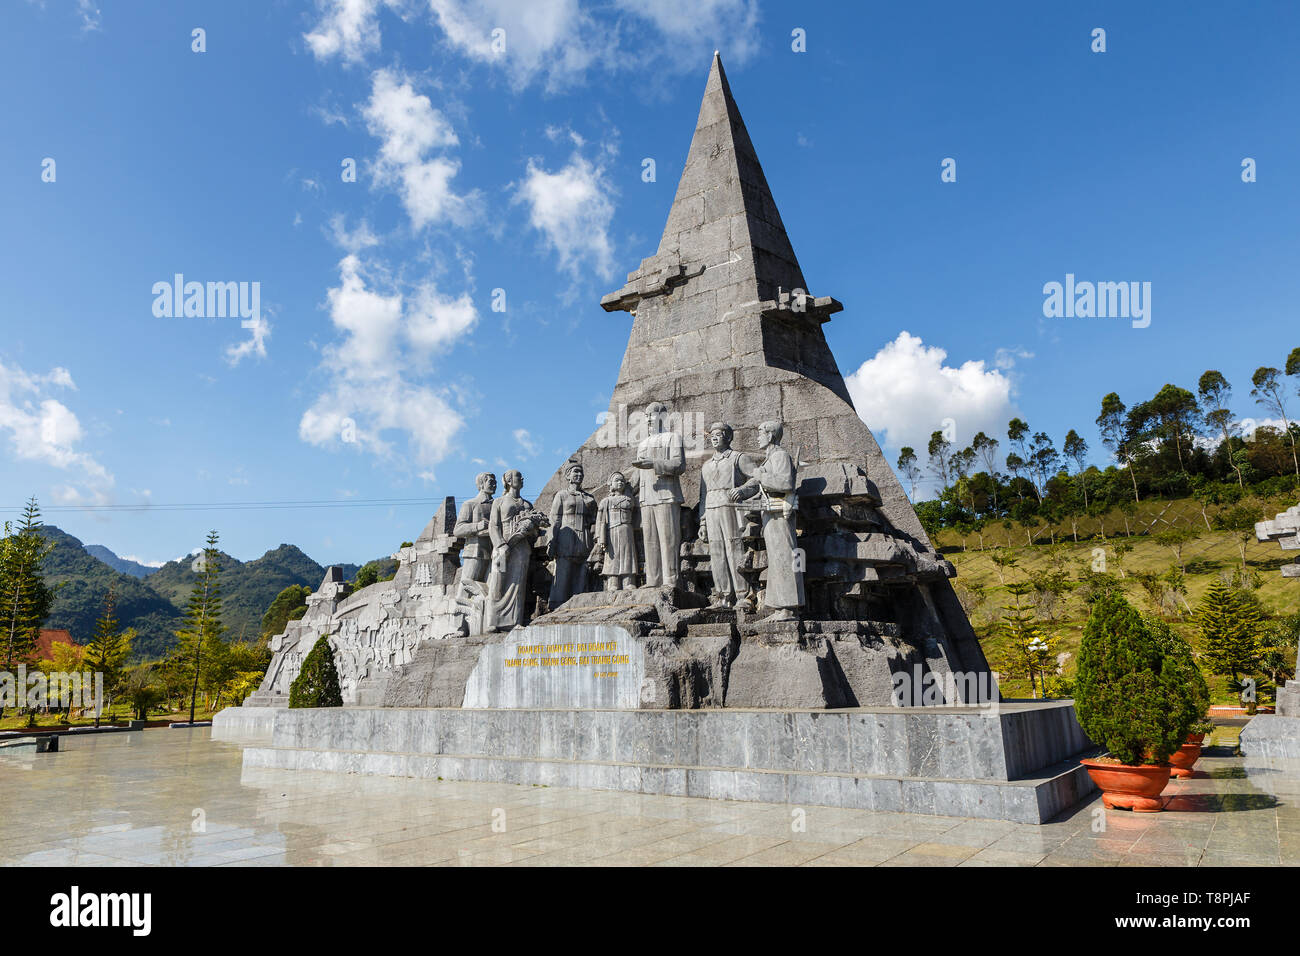 Lai Chau, Vietnam - November 21, 2018: Uncle Ho monument with people and ethnicity of Lai Chau province. Stock Photo